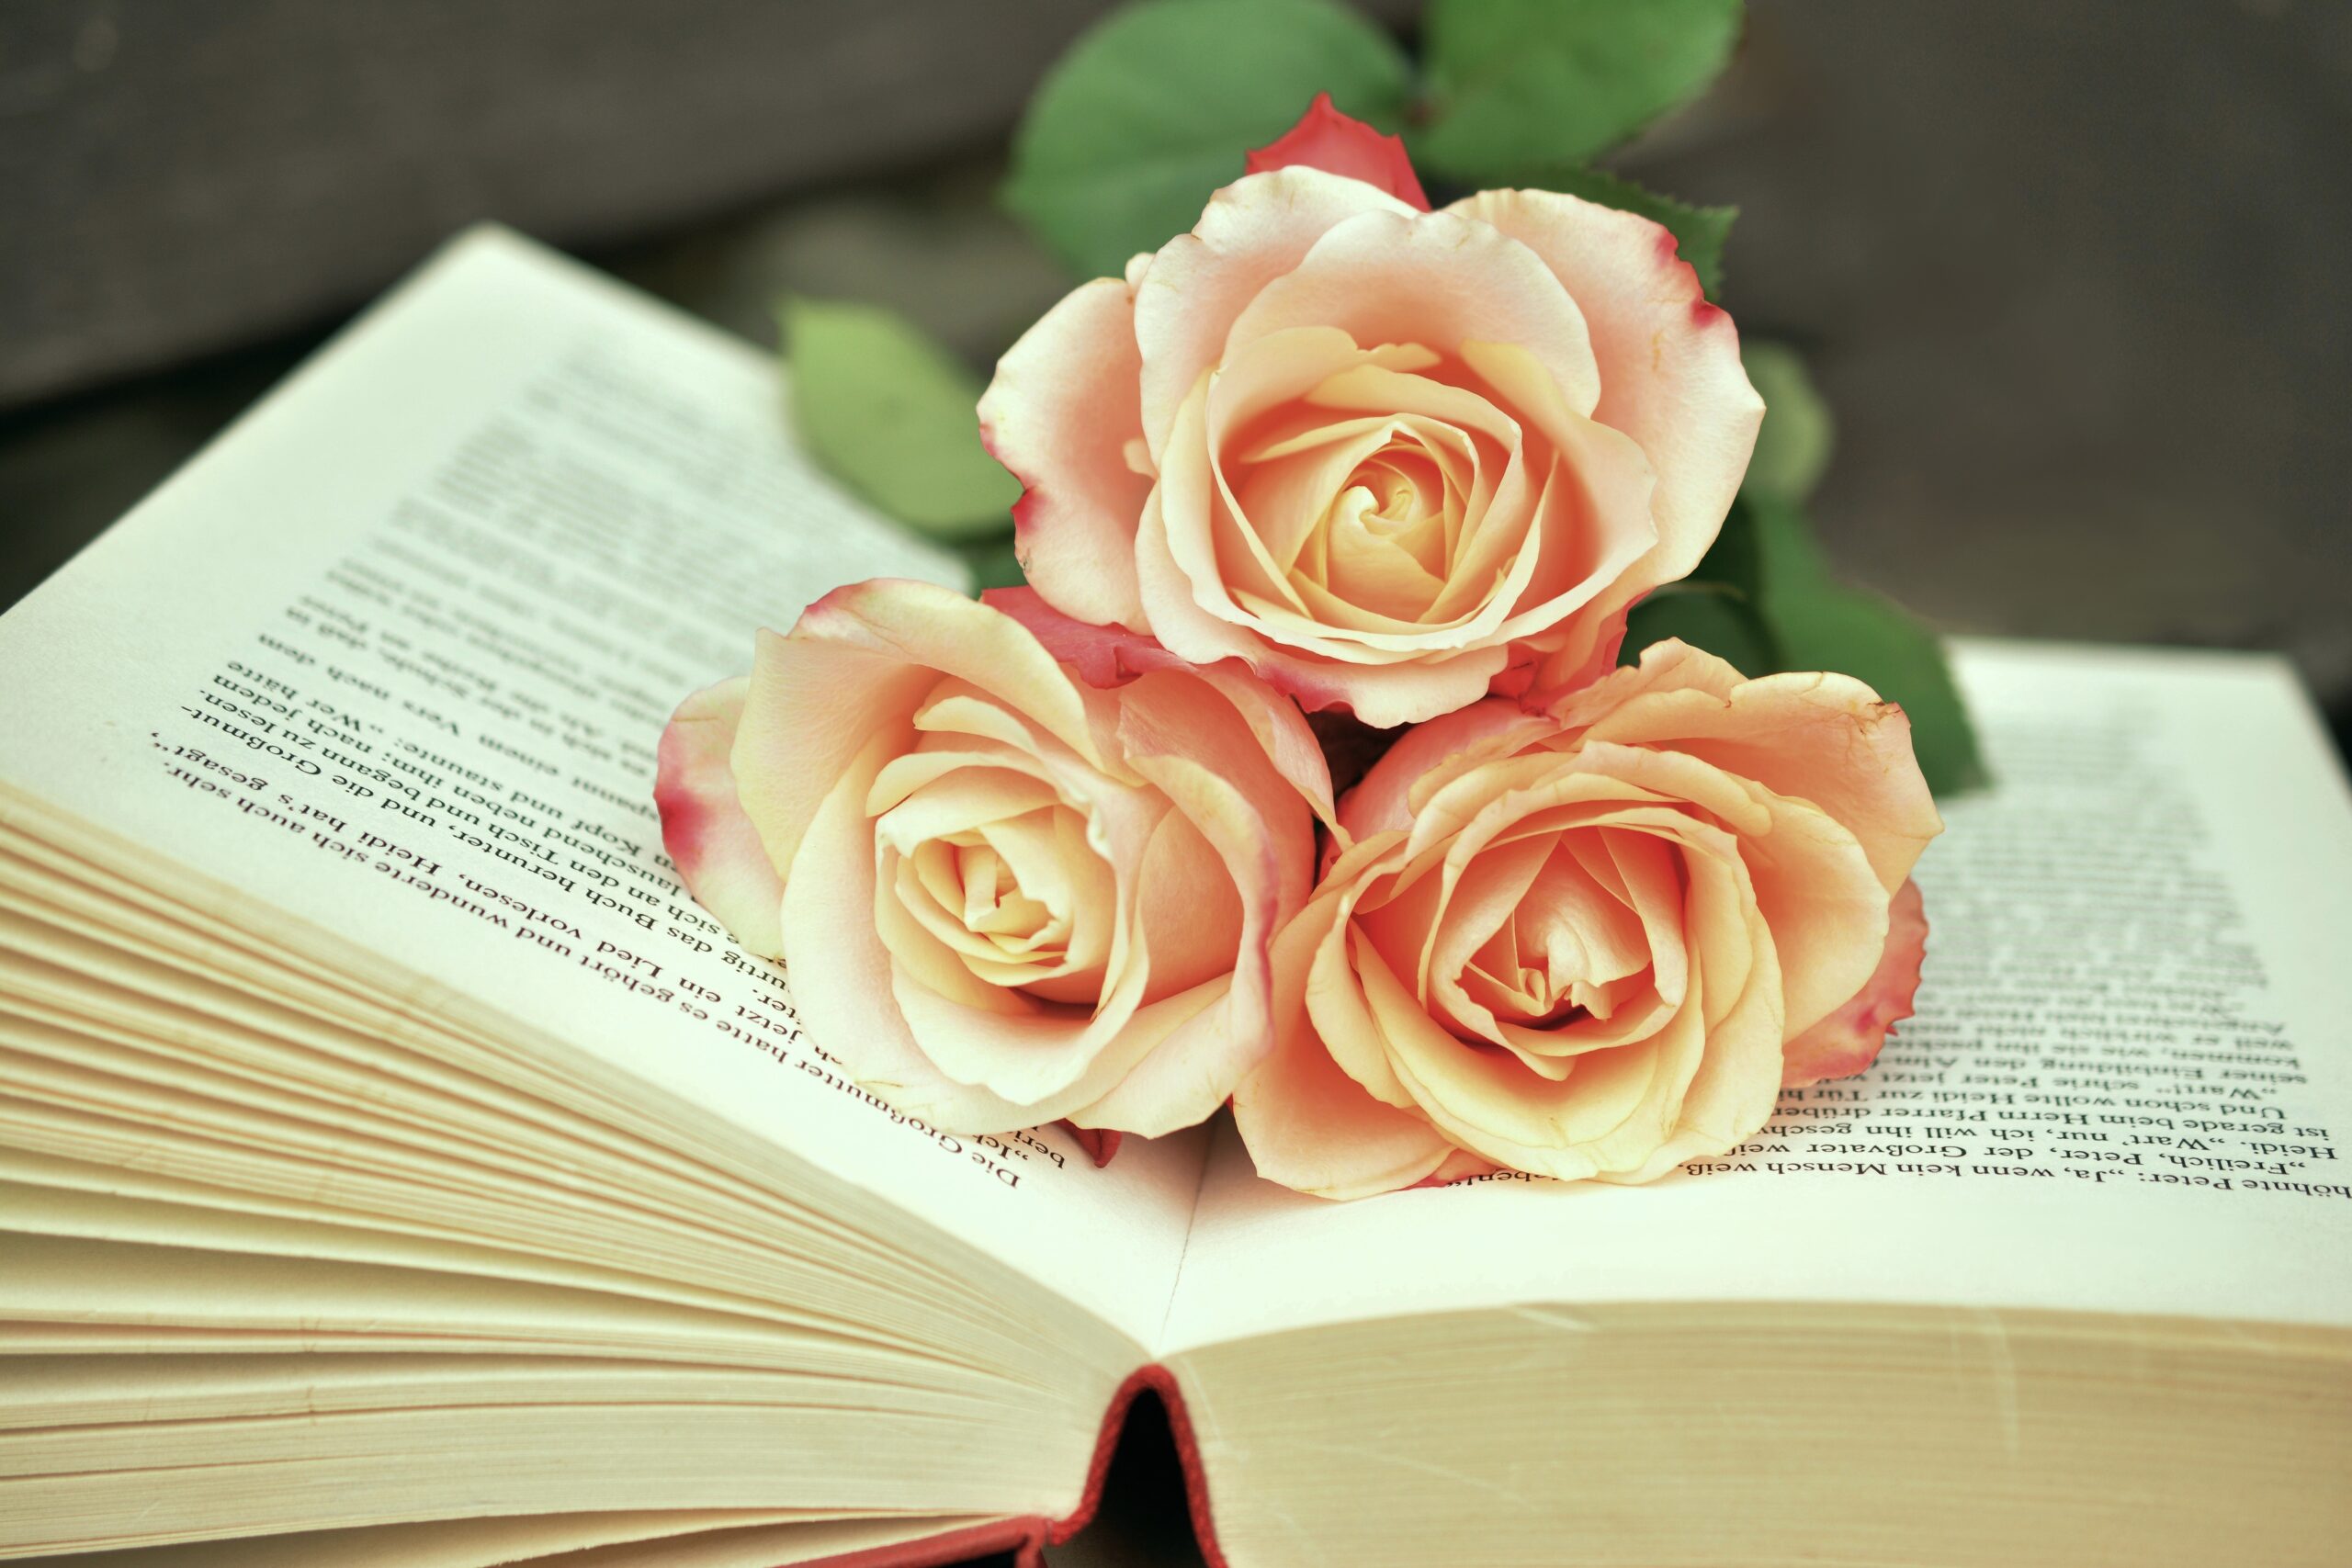 Roses on an Open Book